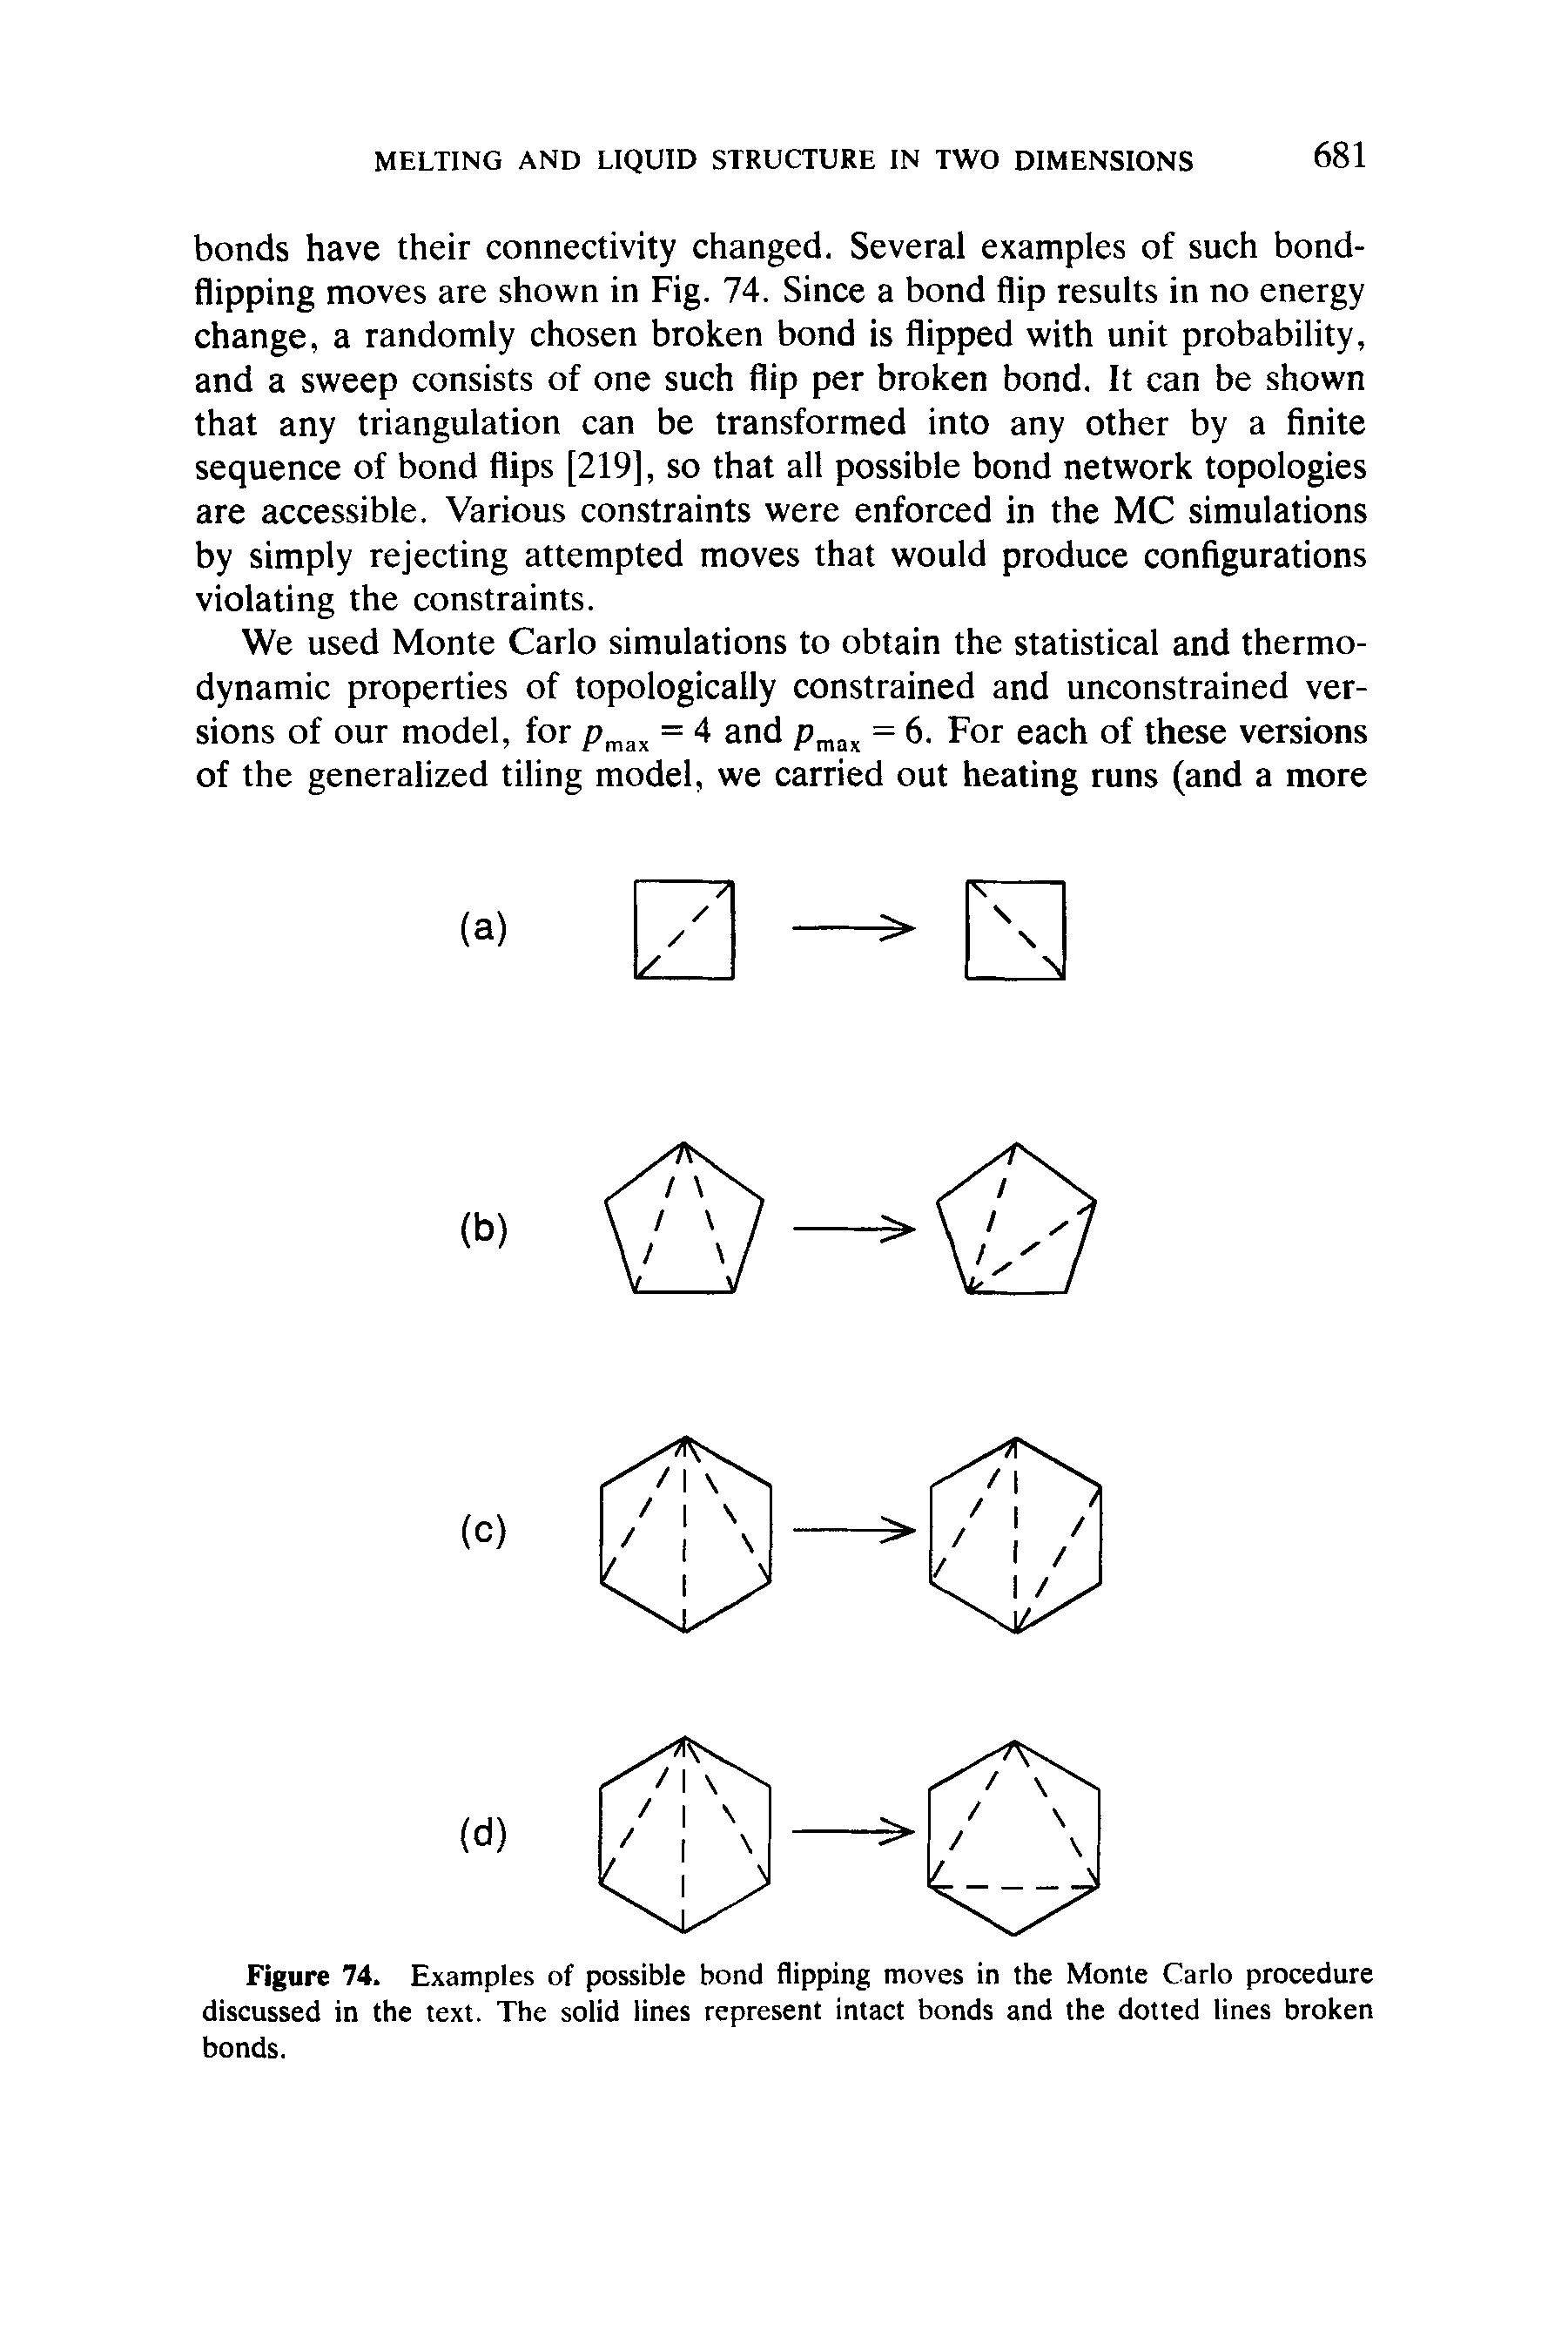 Figure 74. Examples of possible bond flipping moves in the Monte Carlo procedure discussed in the text. The solid lines represent intact bonds and the dotted lines broken bonds.